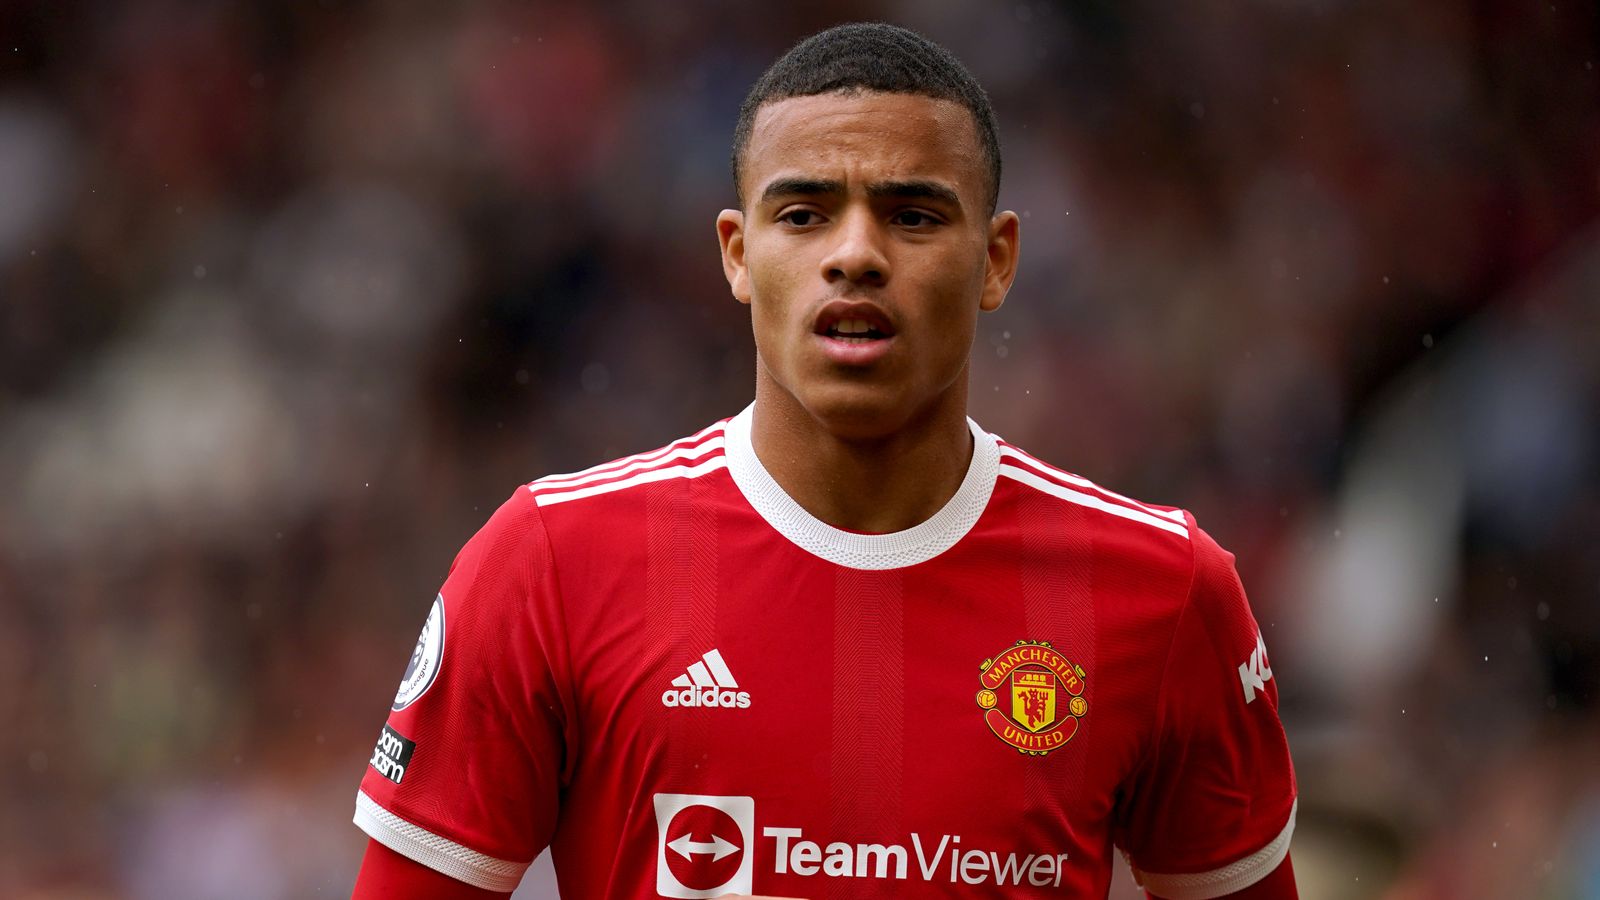 Will Mason Greenwood ever play for Man United